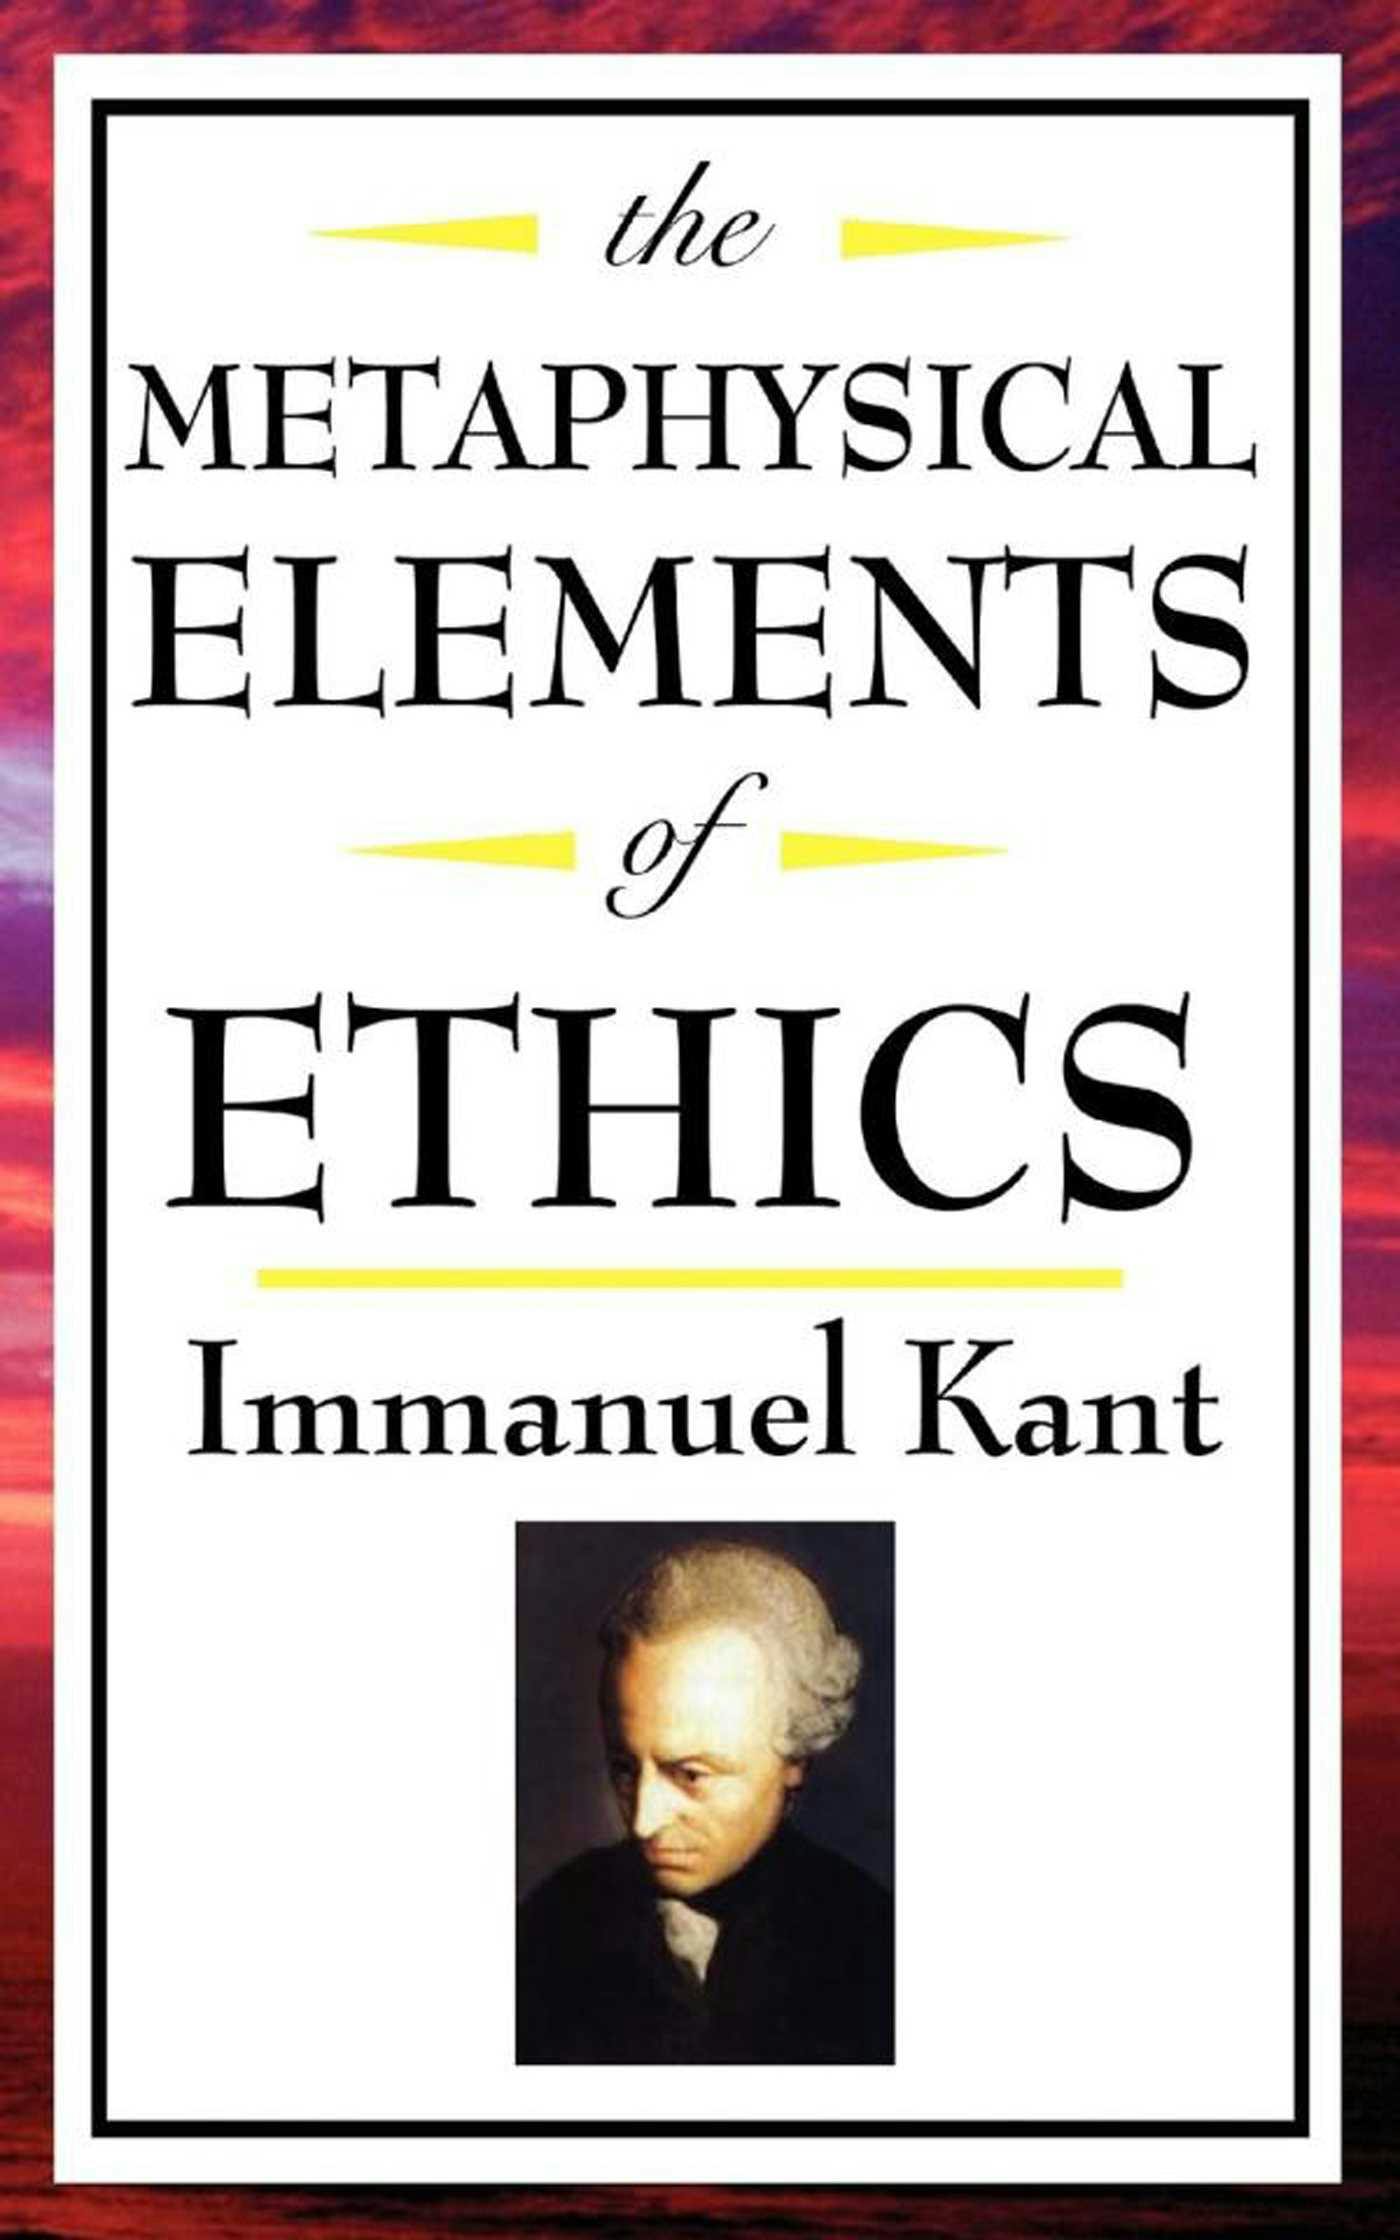 The Metaphysical Elements of Ethics - Immanual Kant